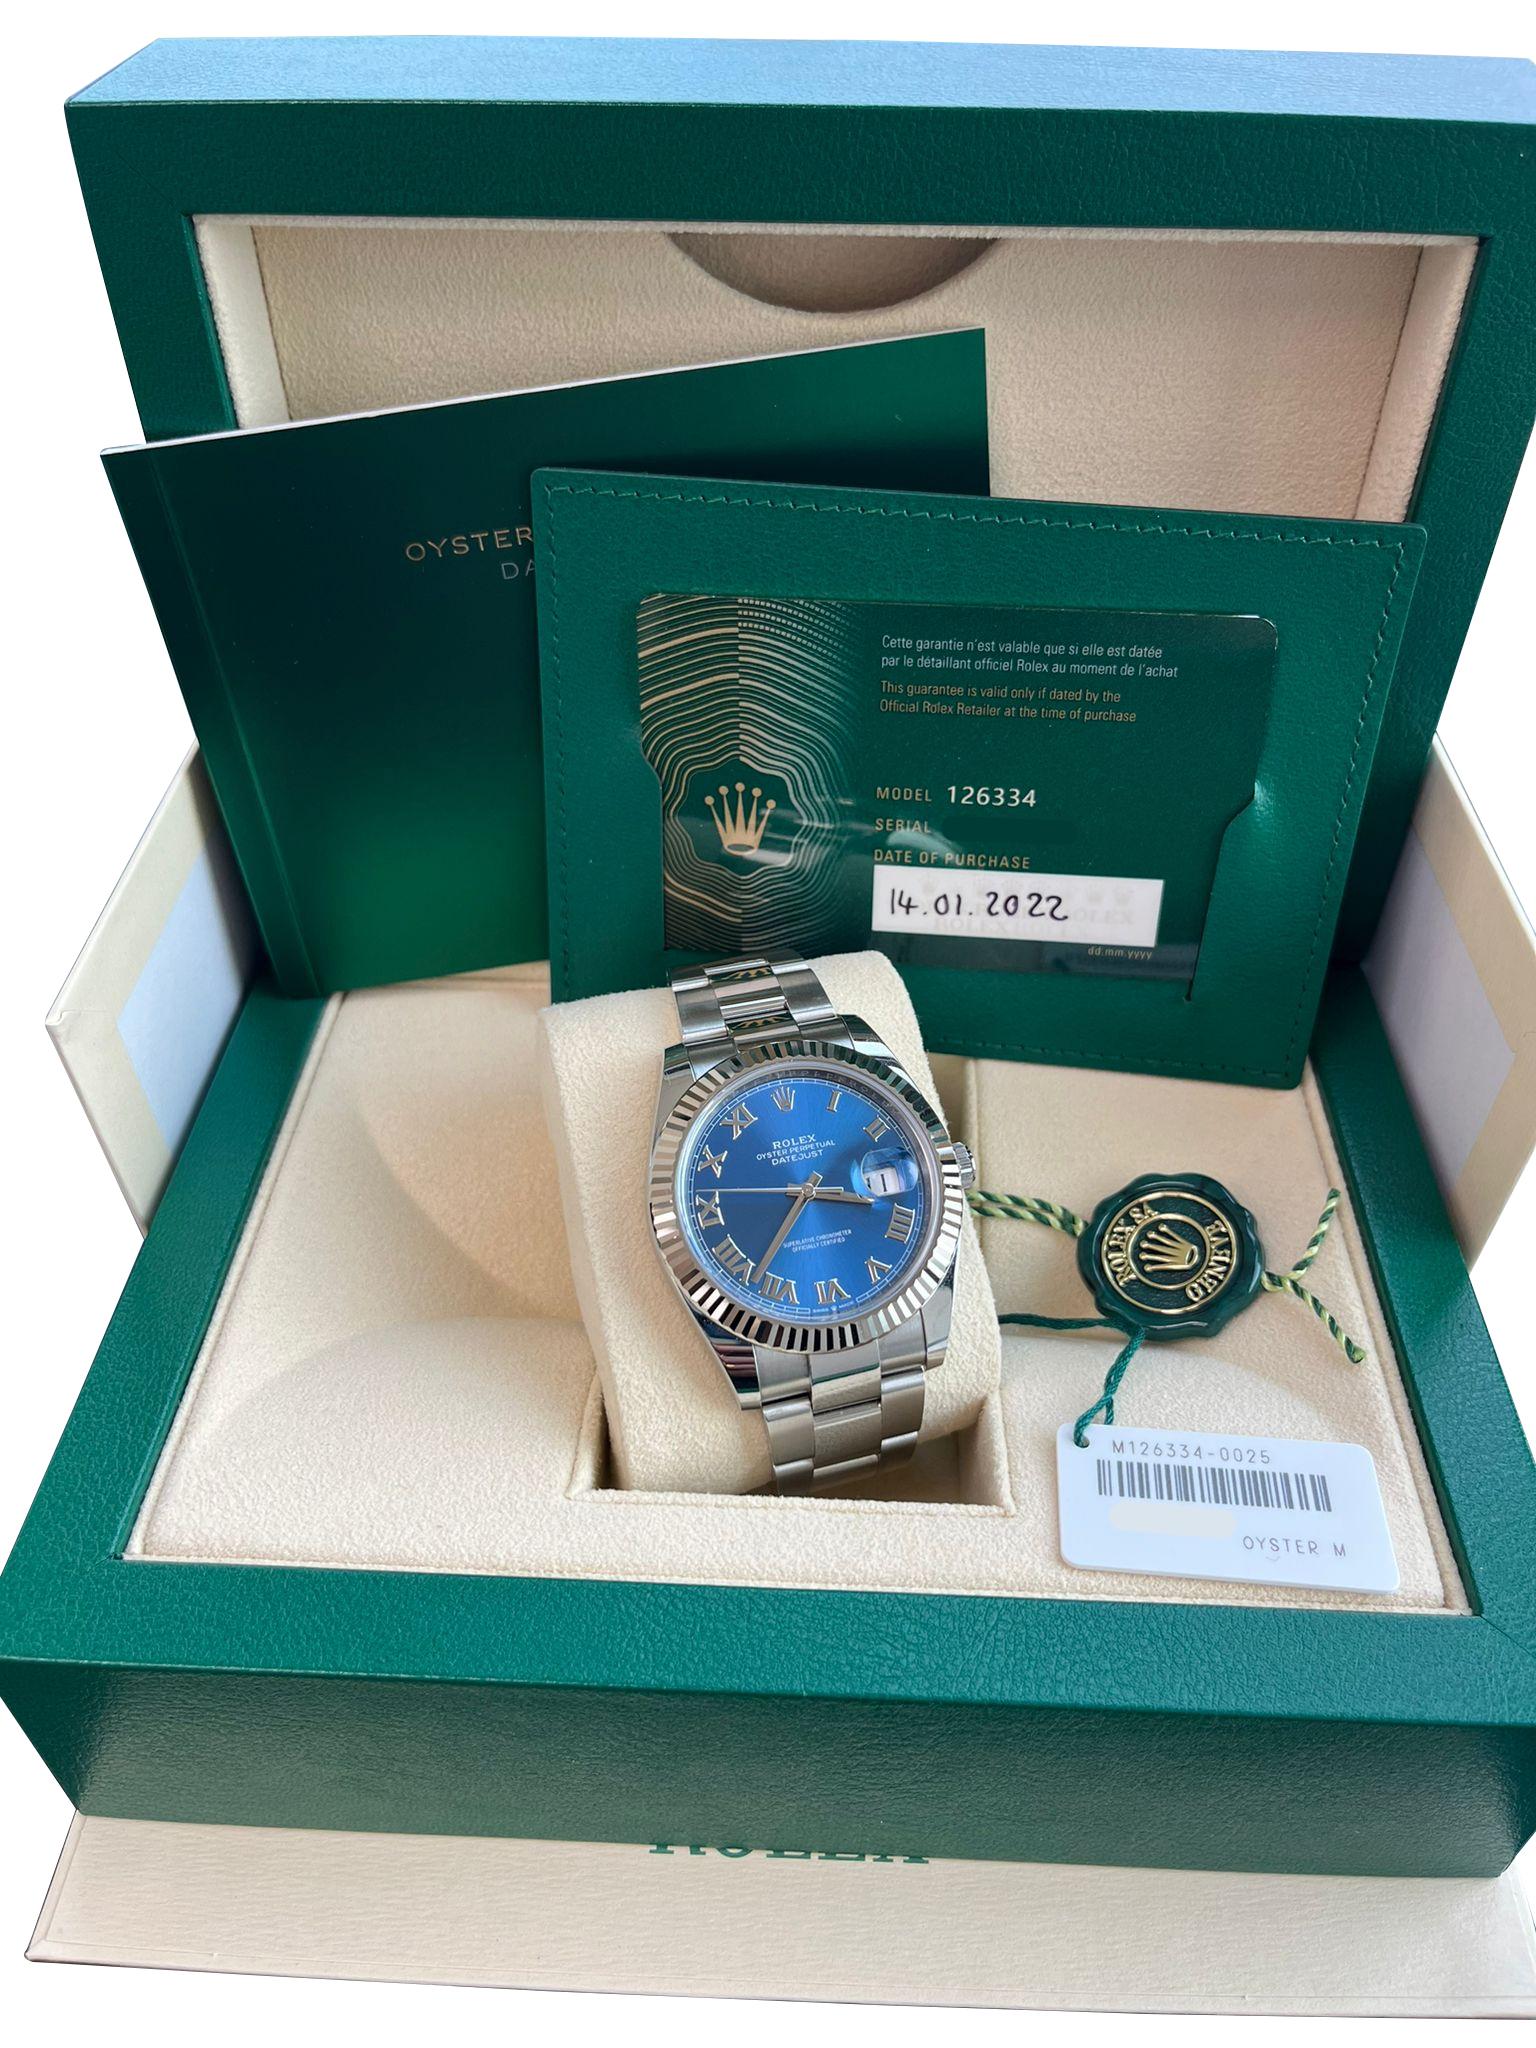 Rolex Datejust 41mm Steel White Gold Blue Dial Fluted Bezel Oyster Watch 126334 In New Condition For Sale In Aventura, FL